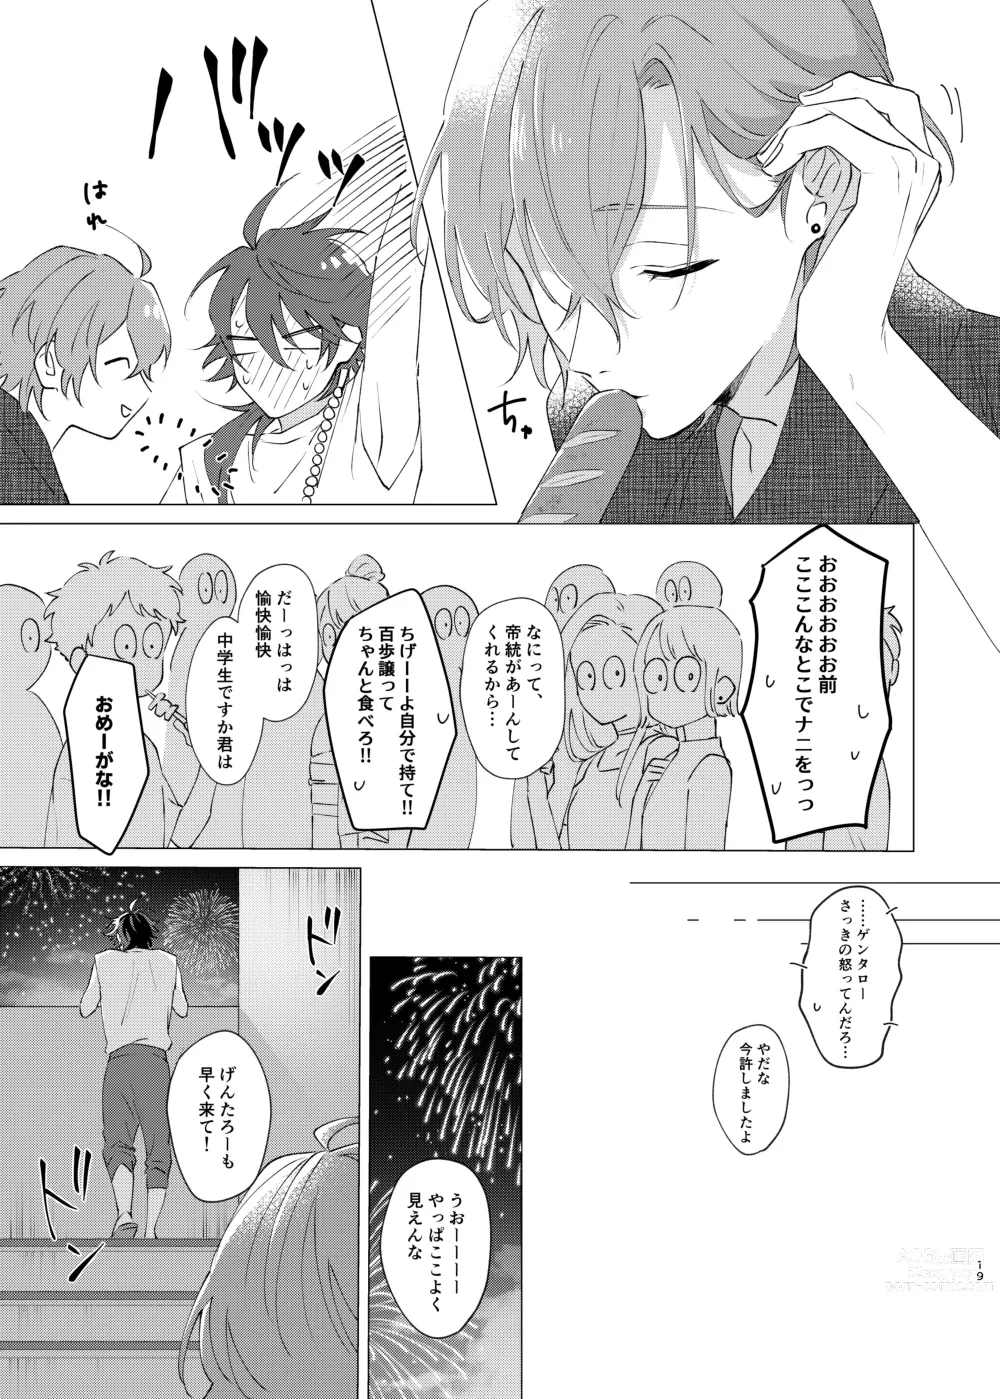 Page 17 of doujinshi Im leaving for good.